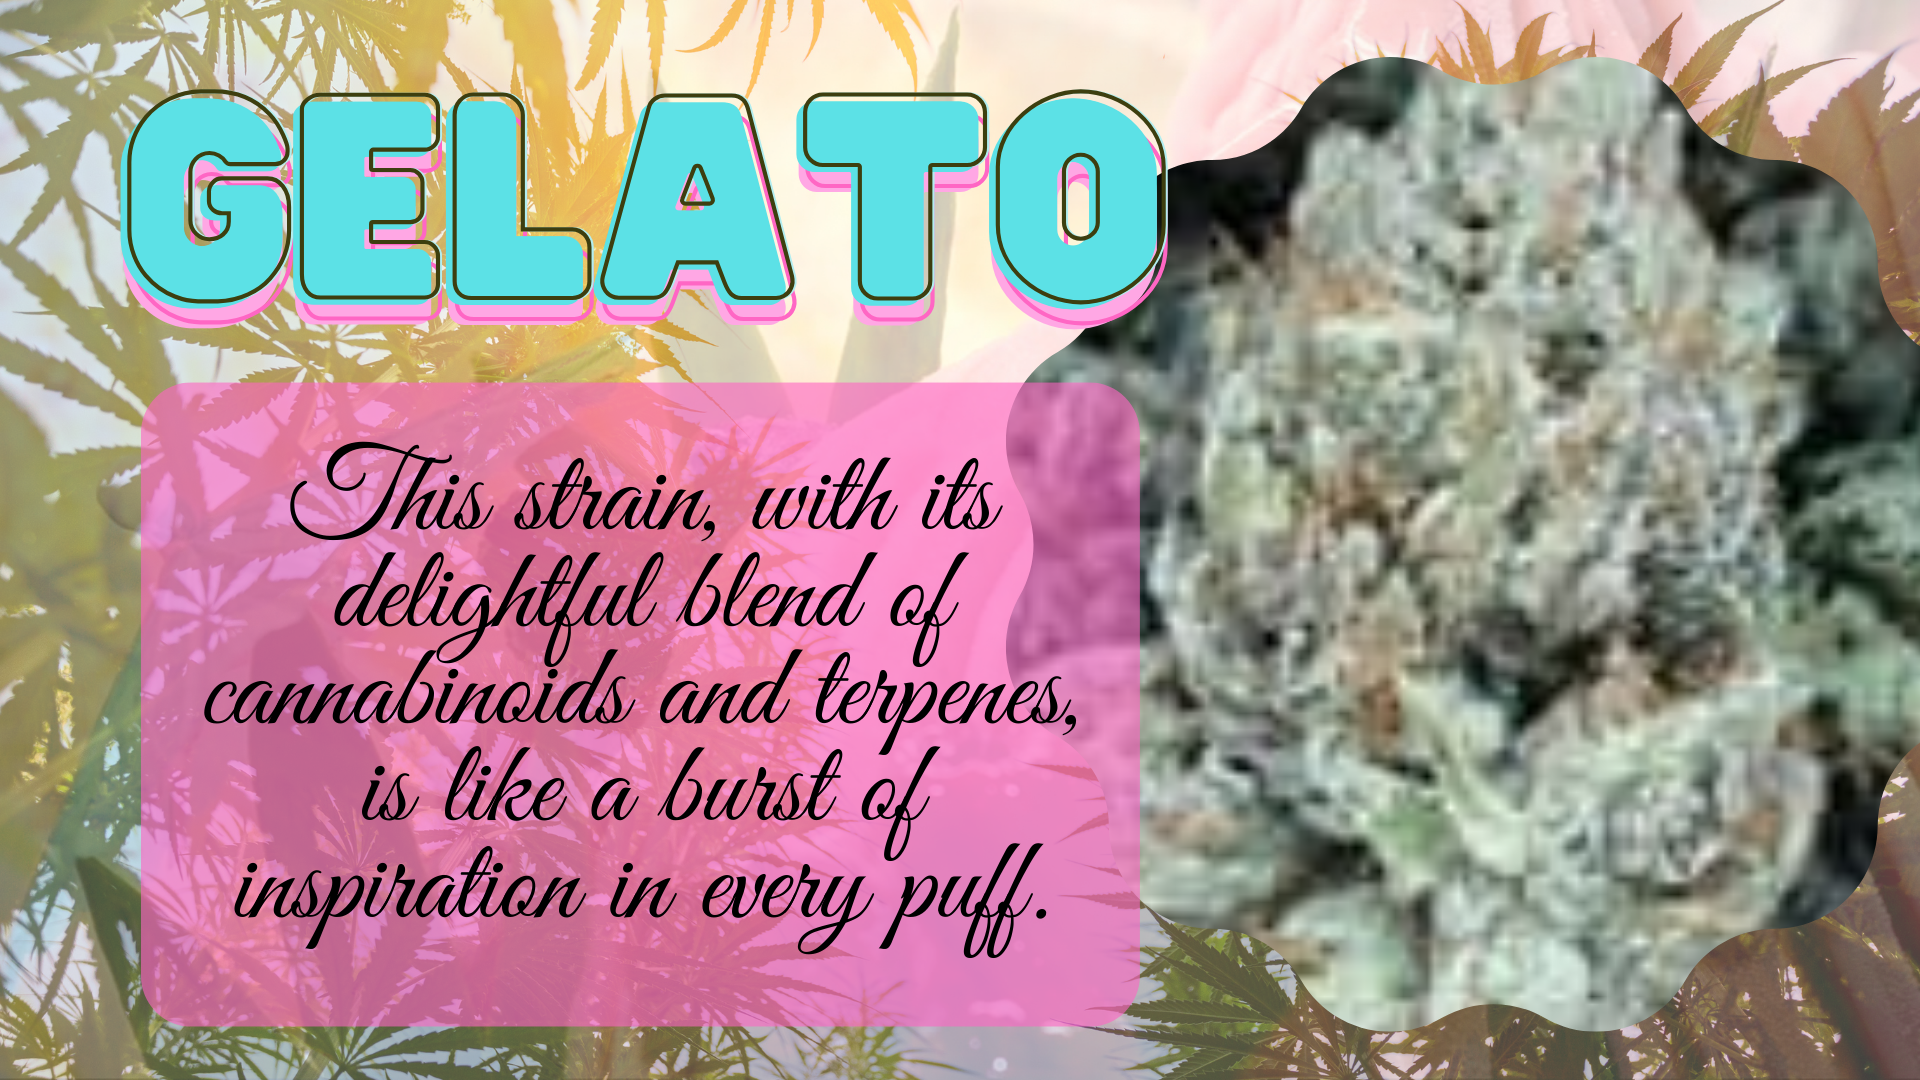 Gelato is my go-to companion. This strain, with its delightful blend of cannabinoids and terpenes, is like a burst of inspiration in every puff.